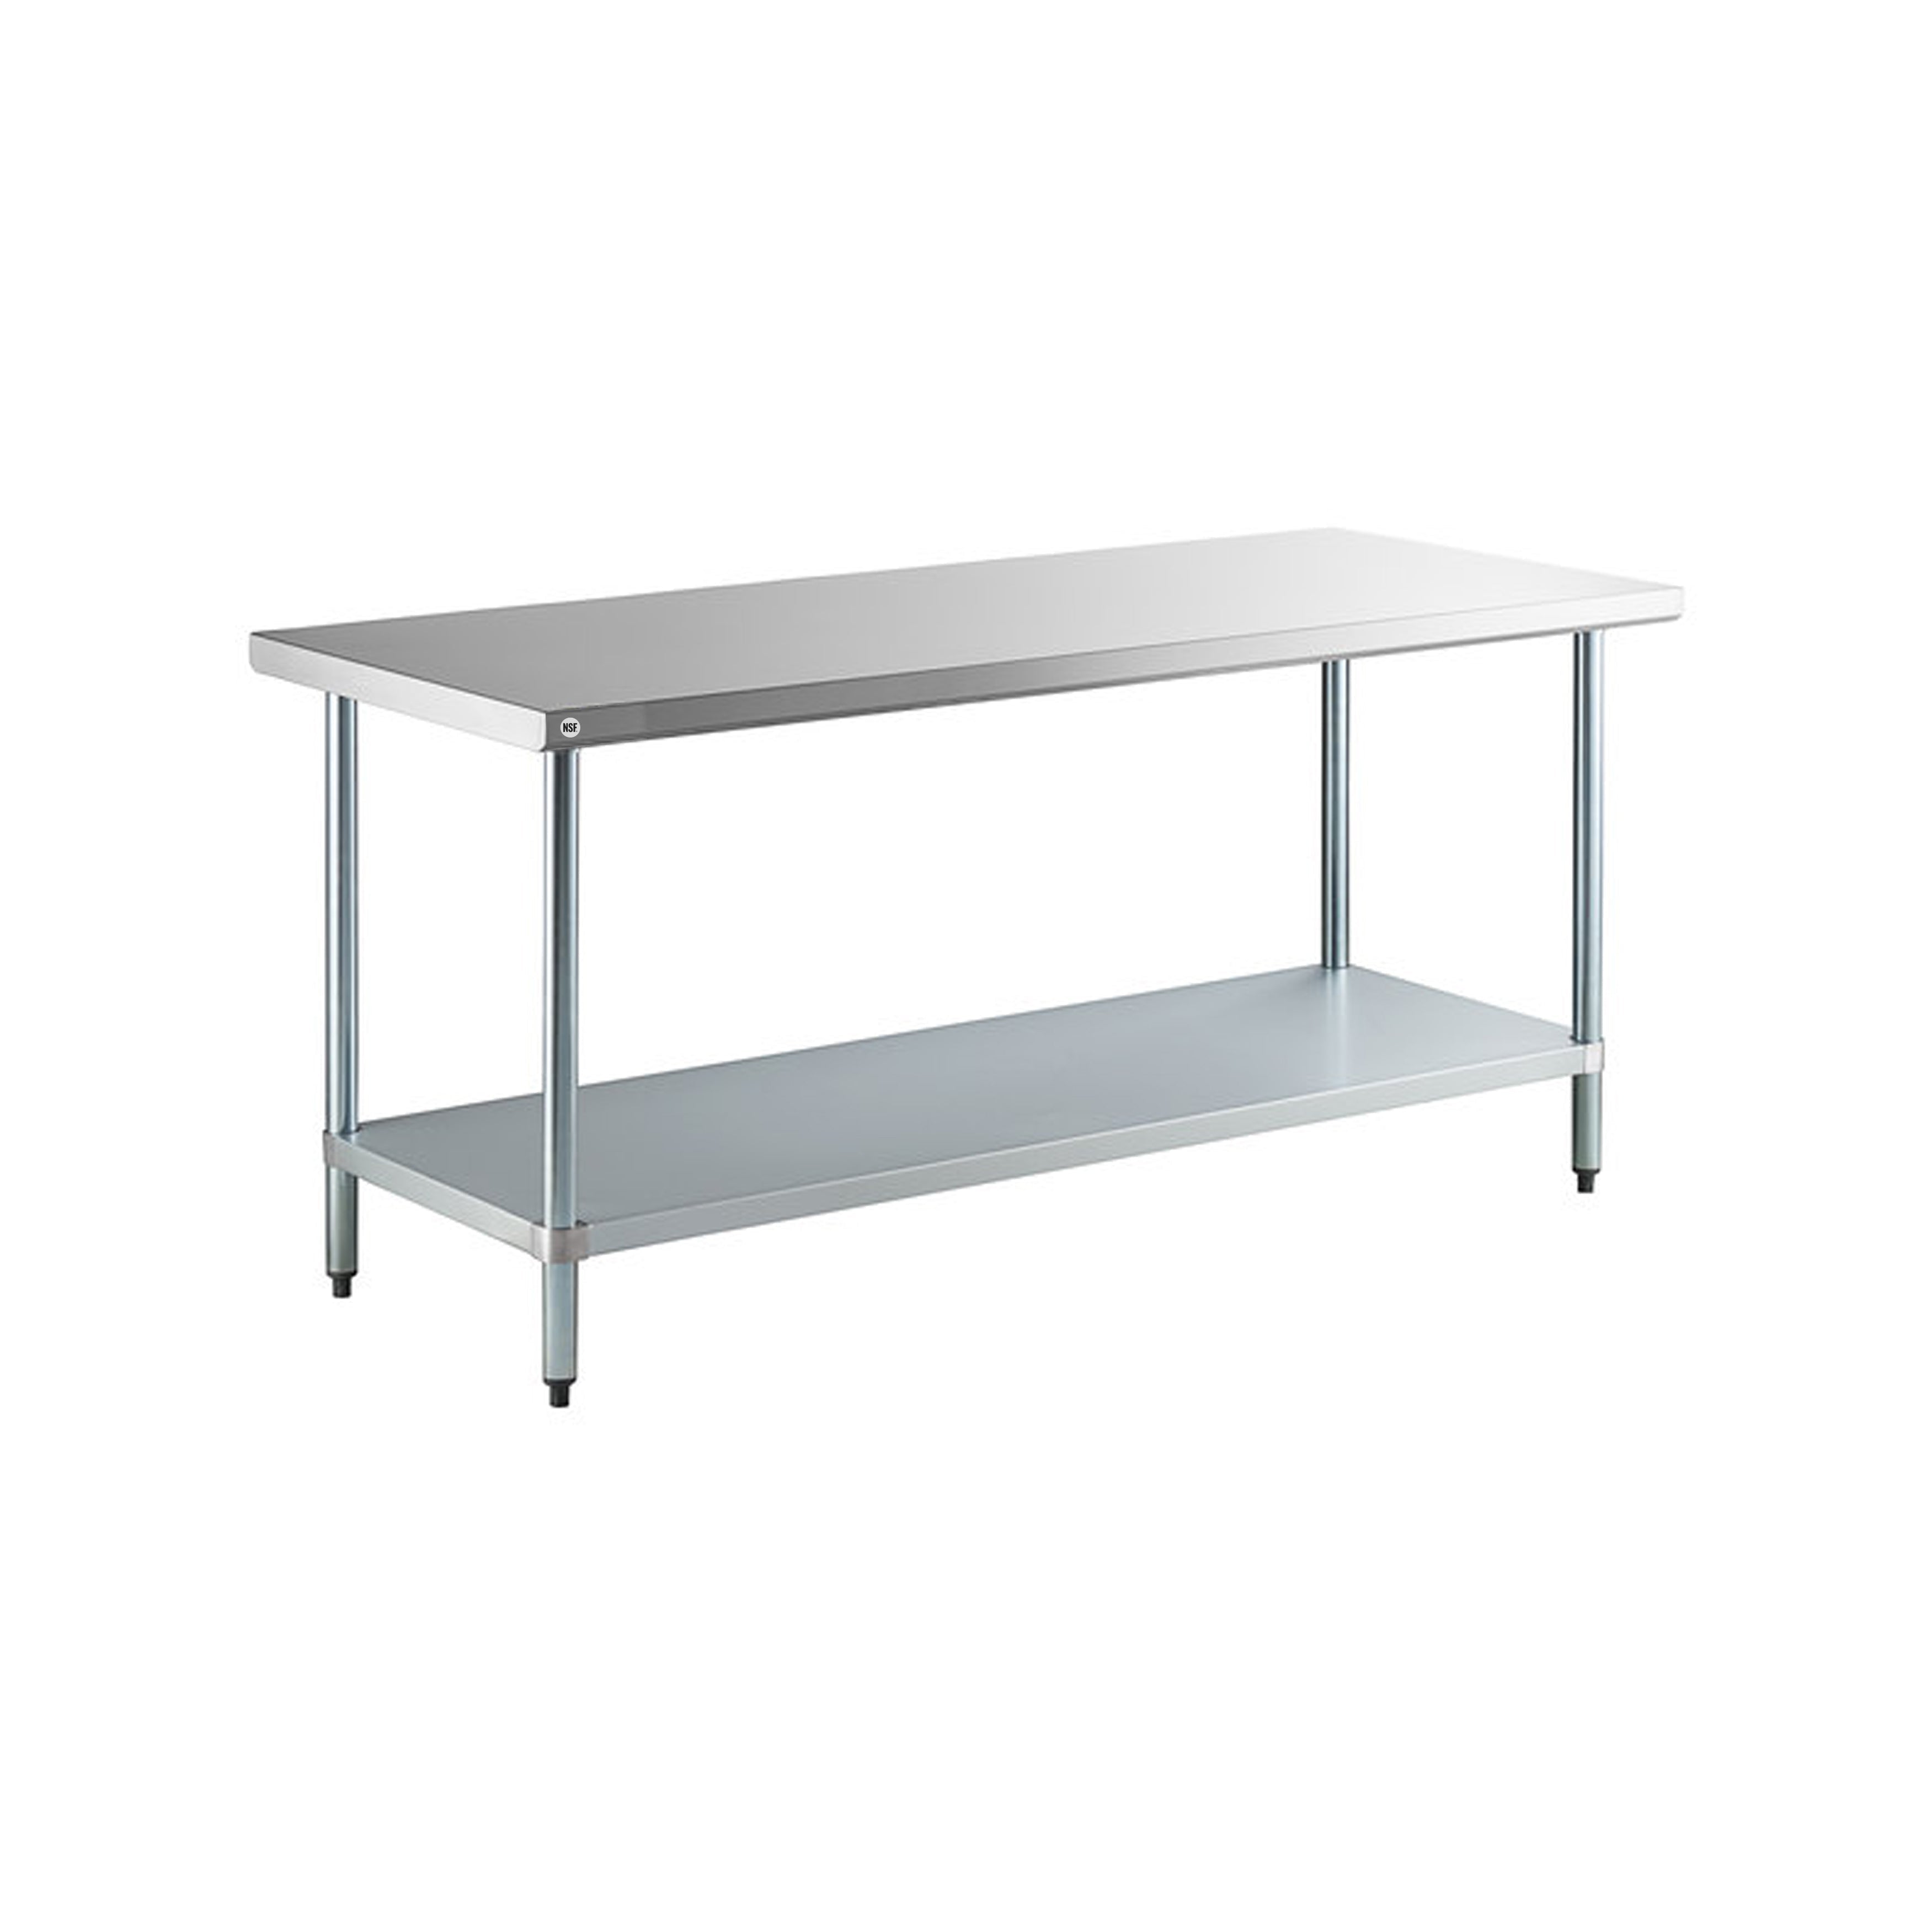 Omcan - 19140, Commercial 24" x 72" Stainless Steel Kitchen Work Table 1200lbs Heavy Duty